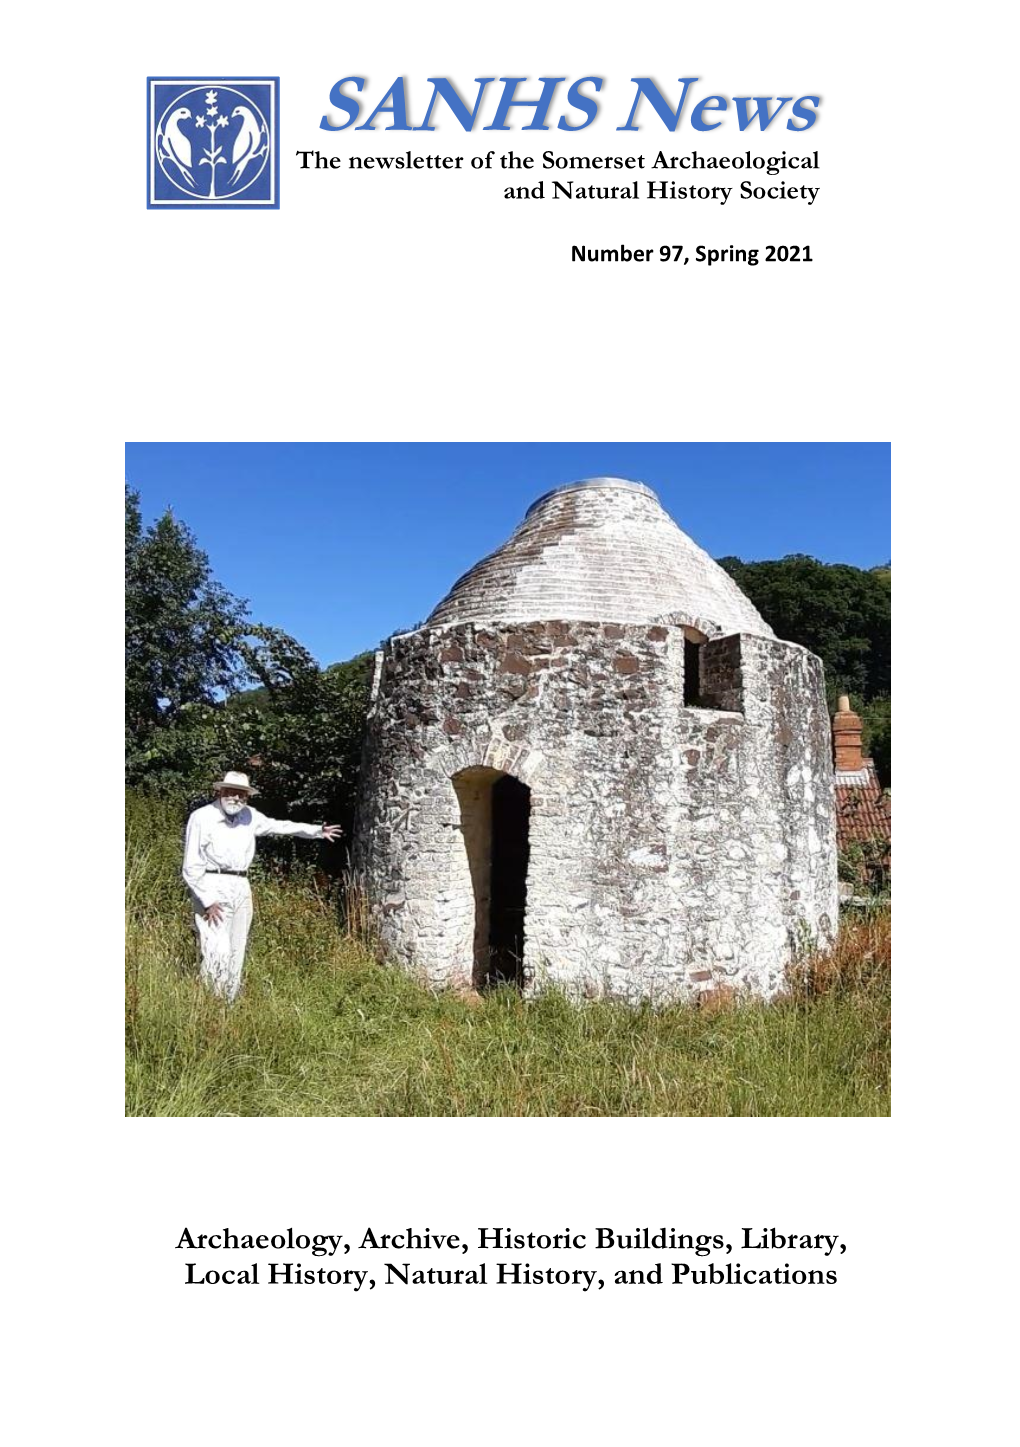 SANHS News the Newsletter of the Somerset Archaeological and Natural History Society